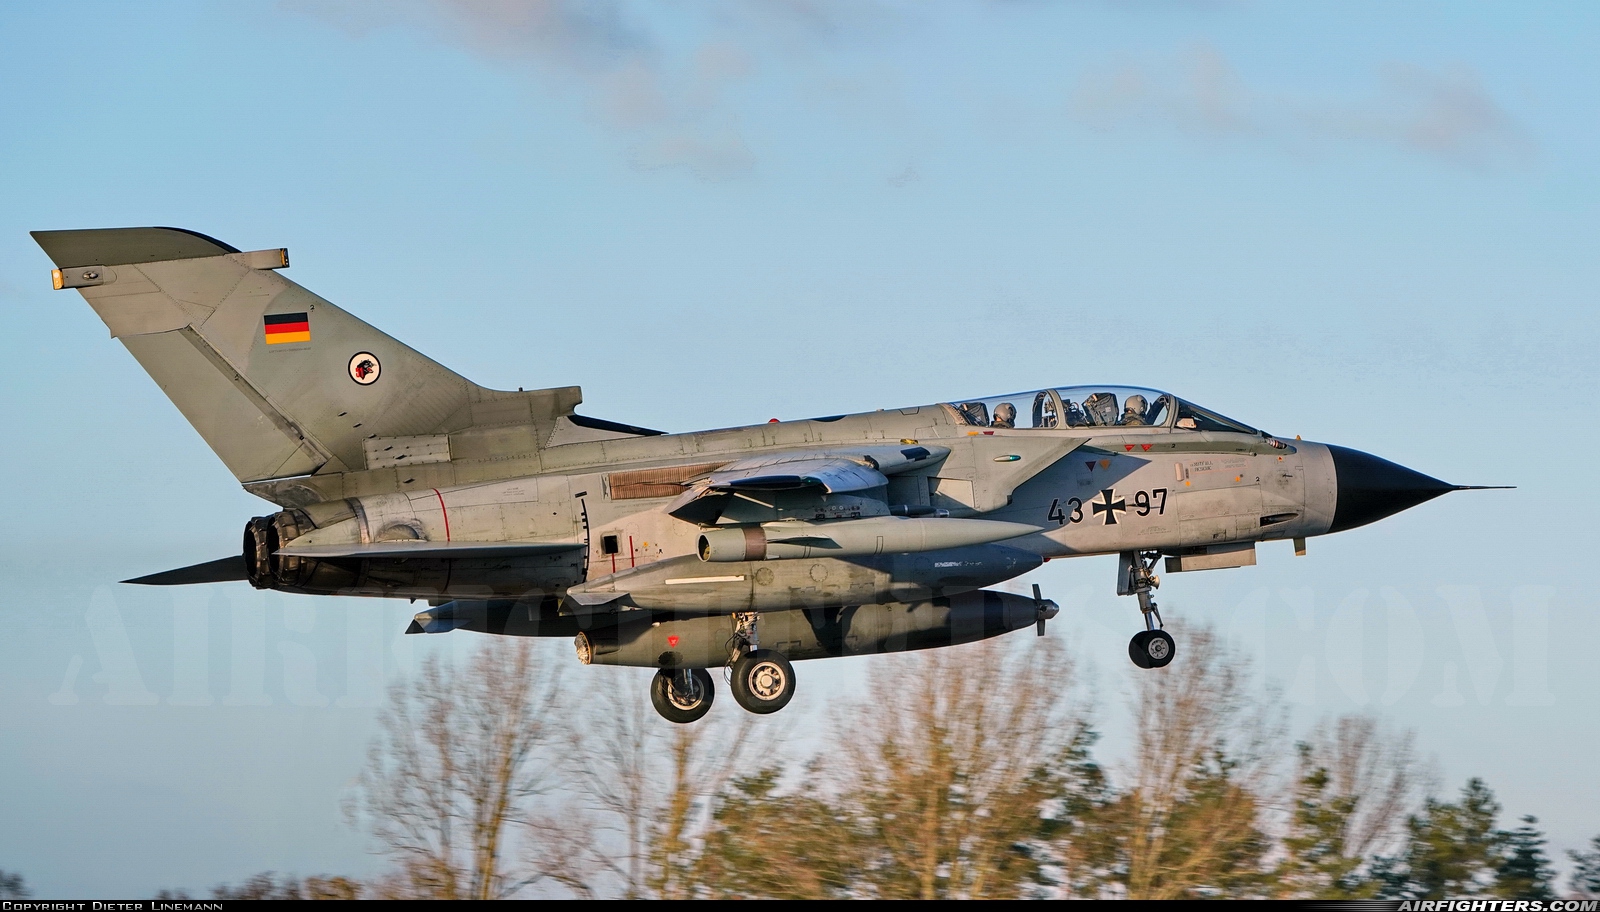 Germany - Air Force Panavia Tornado IDS(T) 43+97 at Wittmundhafen (Wittmund) (ETNT), Germany